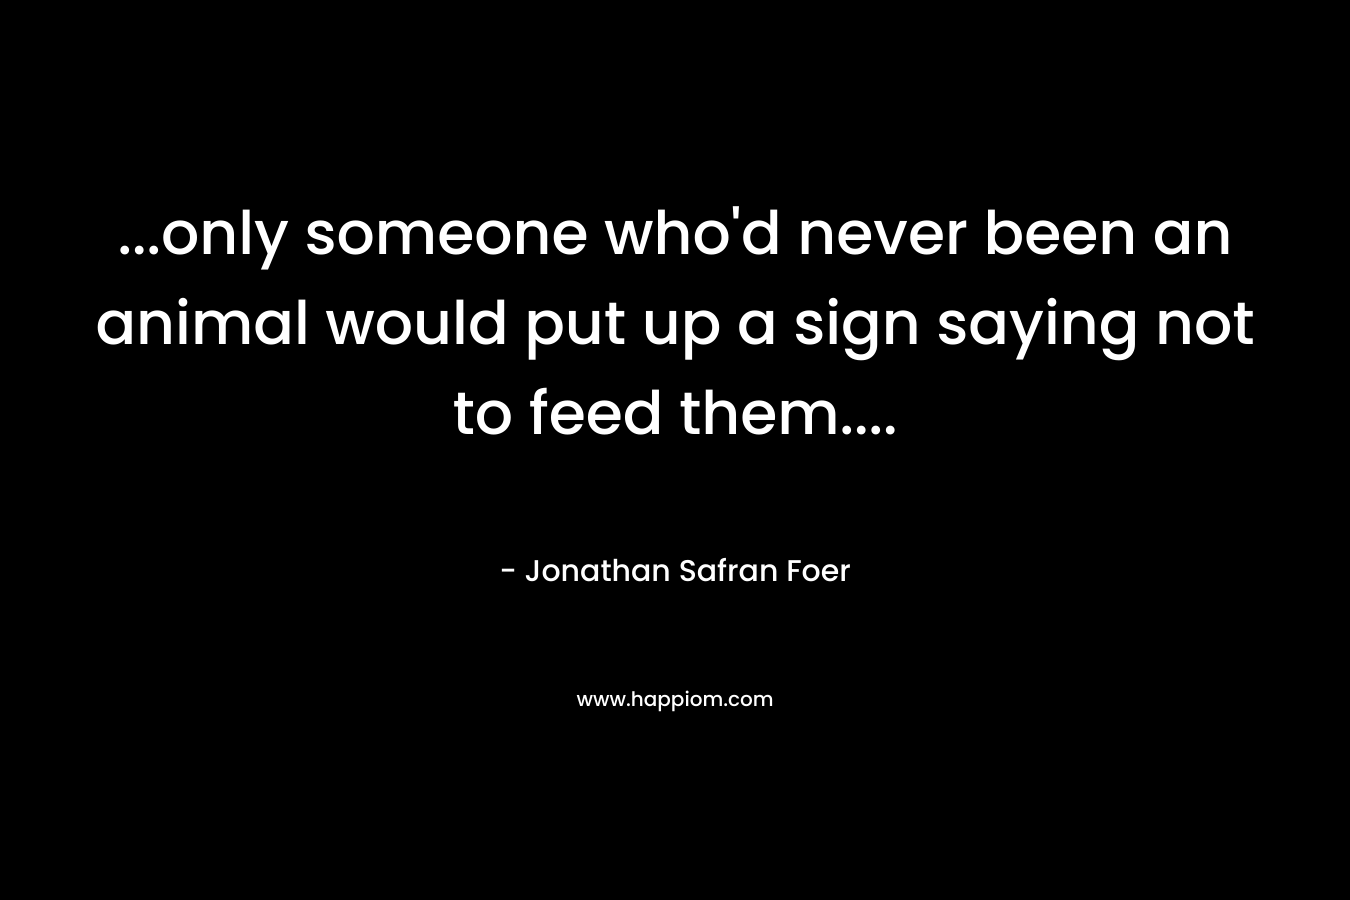 …only someone who’d never been an animal would put up a sign saying not to feed them…. – Jonathan Safran Foer